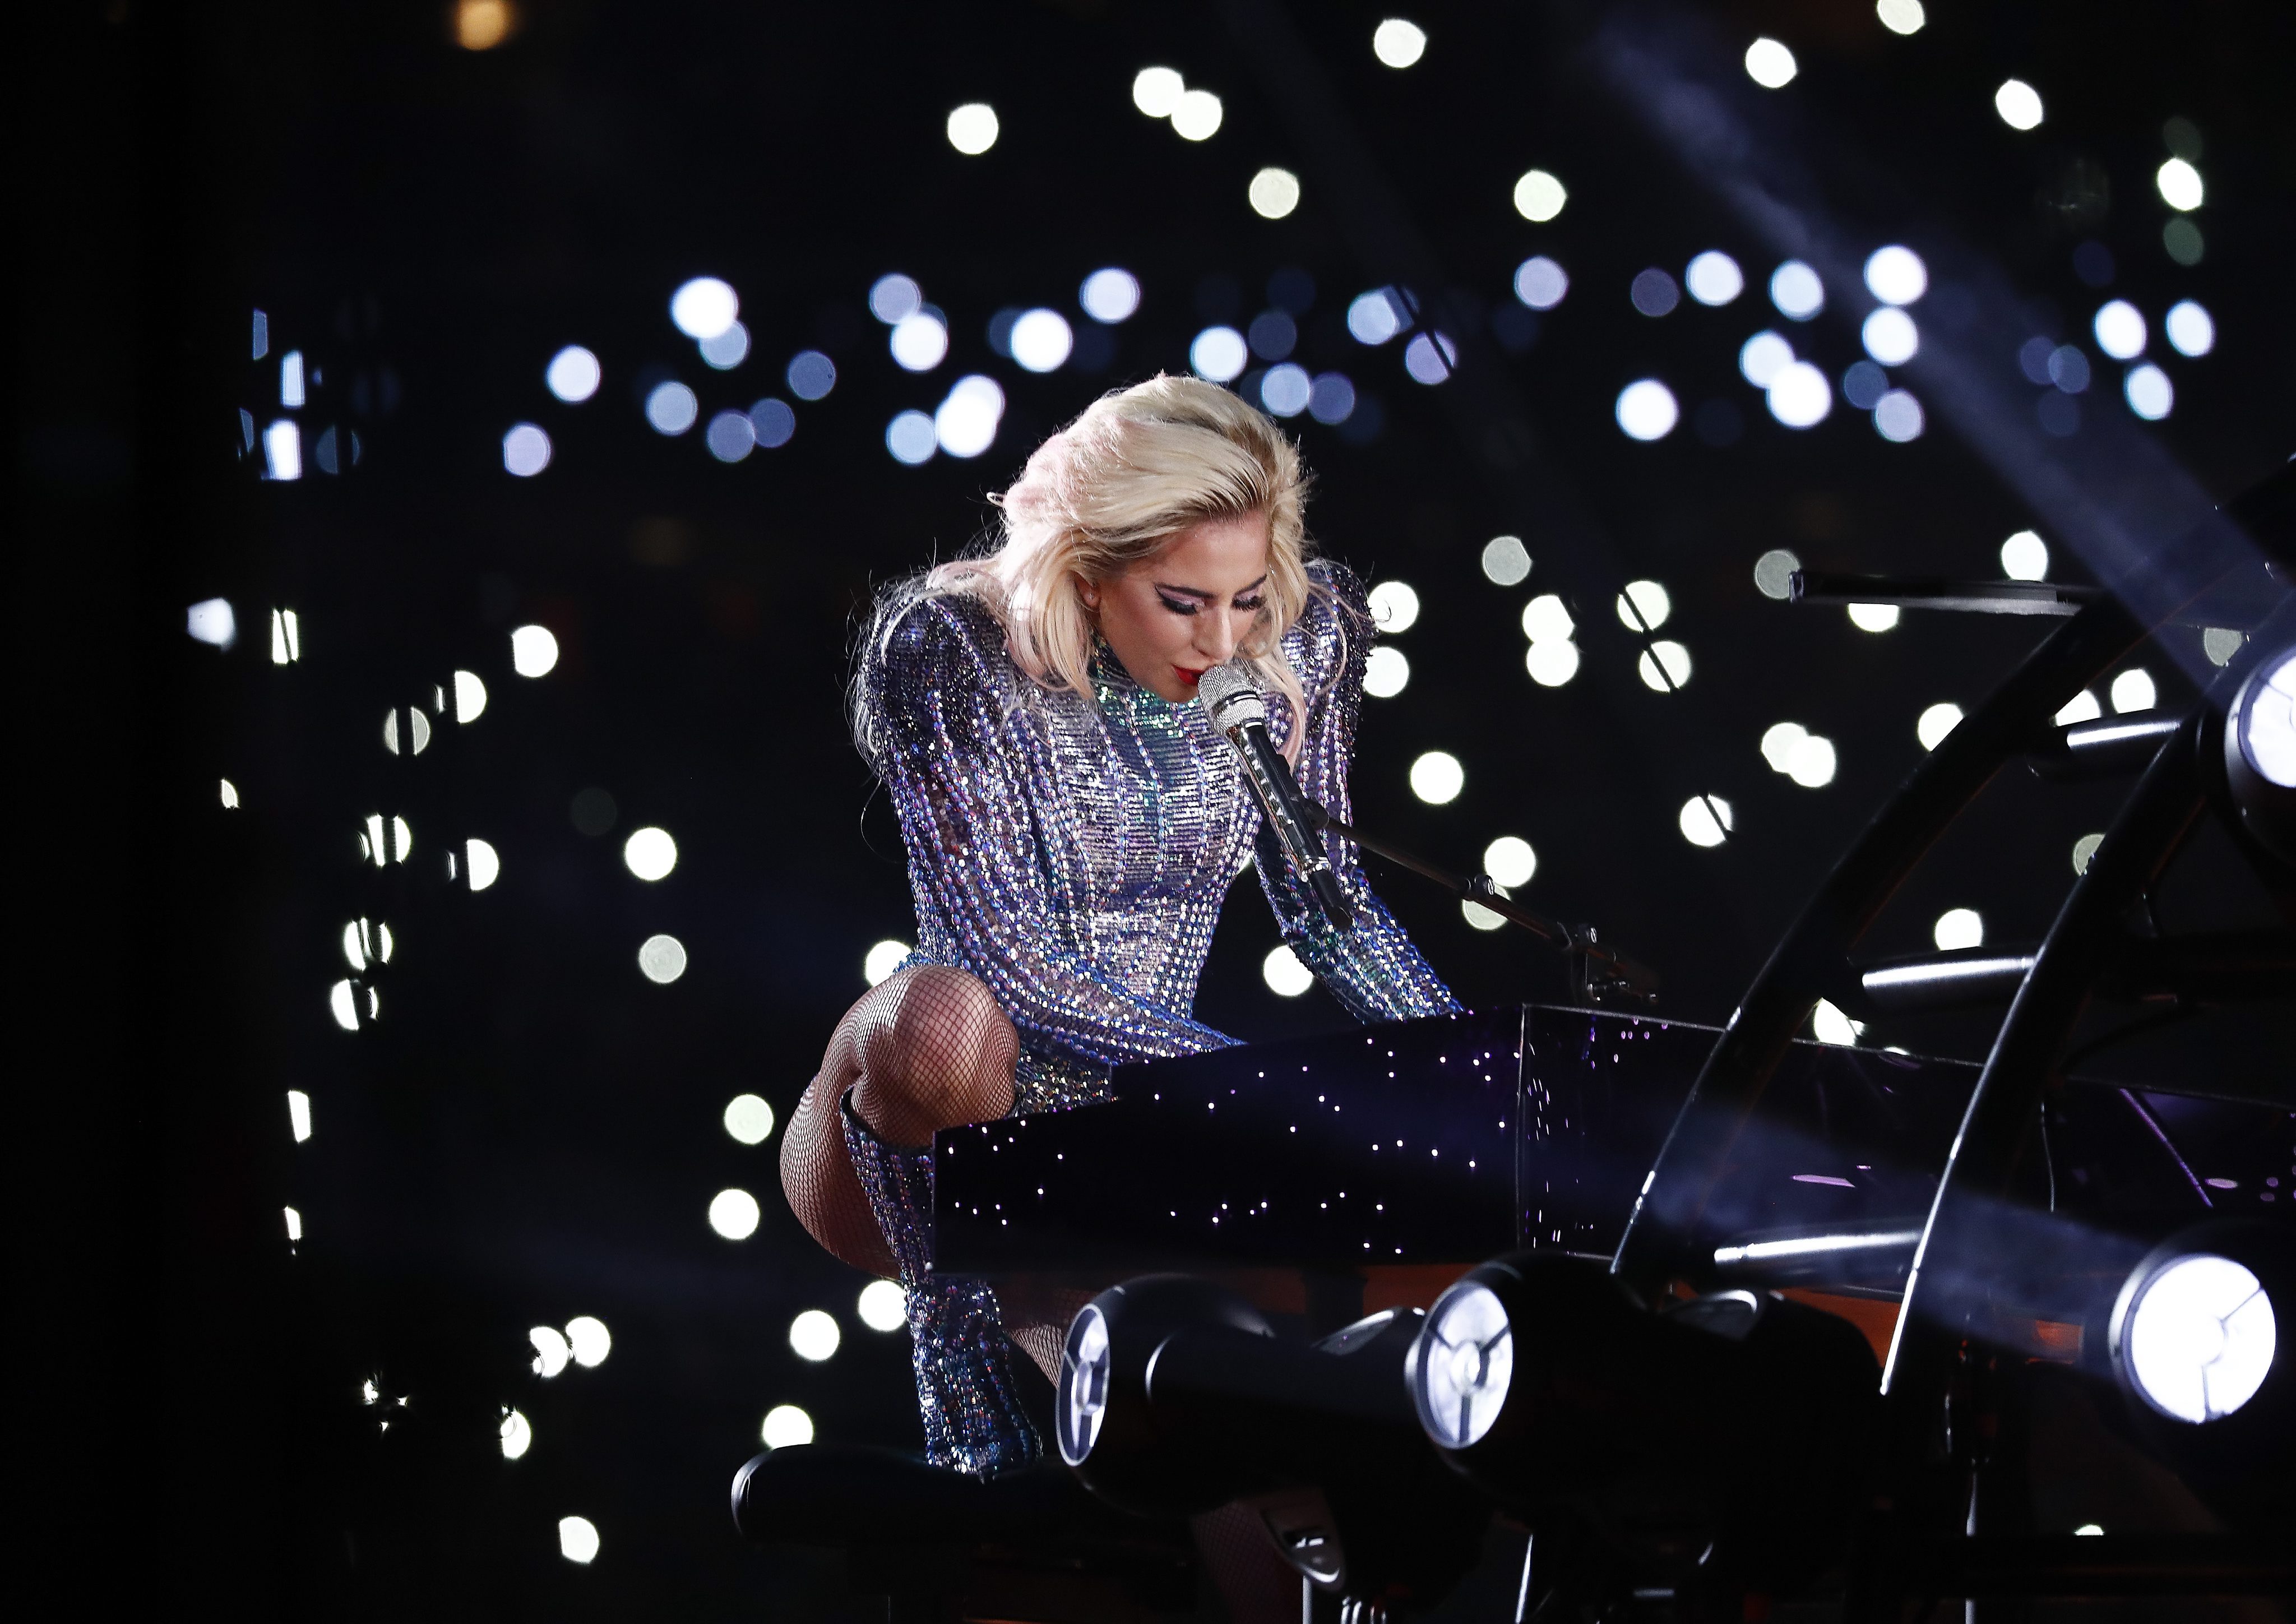 2017-02-05 19:21:49 epaselect epa05774027 US singer Lady Gaga performs during the Halftime Show of Super Bowl LI at NRG Stadium in Houston, Texas, USA, 05 February 2017. The AFC Champion Patriots play the NFC Champion Atlanta Falcons in the National Football League's annual championship game. EPA/LARRY W. SMITH